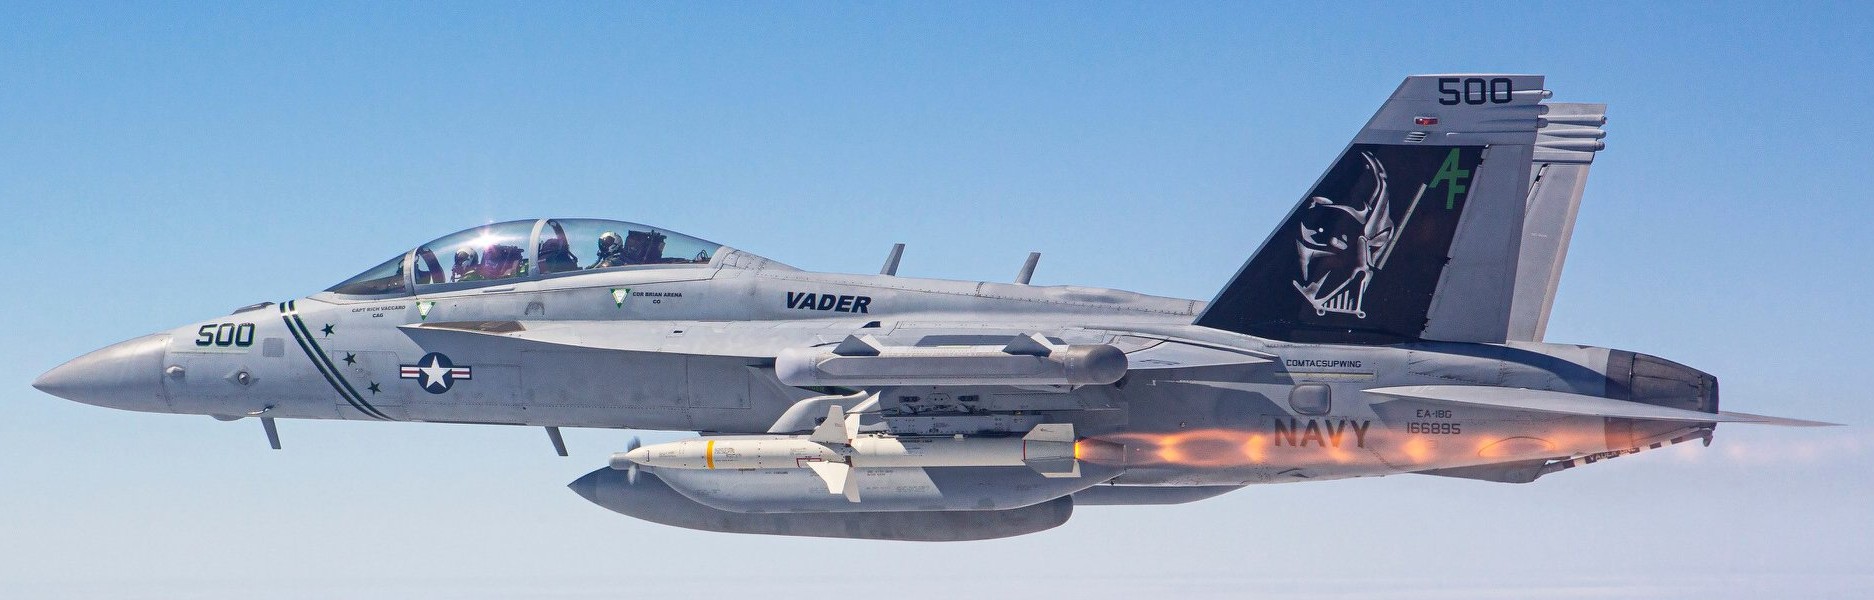 vaq-209 star warriors electronic attack squadron ea-18g growler us navy agm-88 harm missile 98